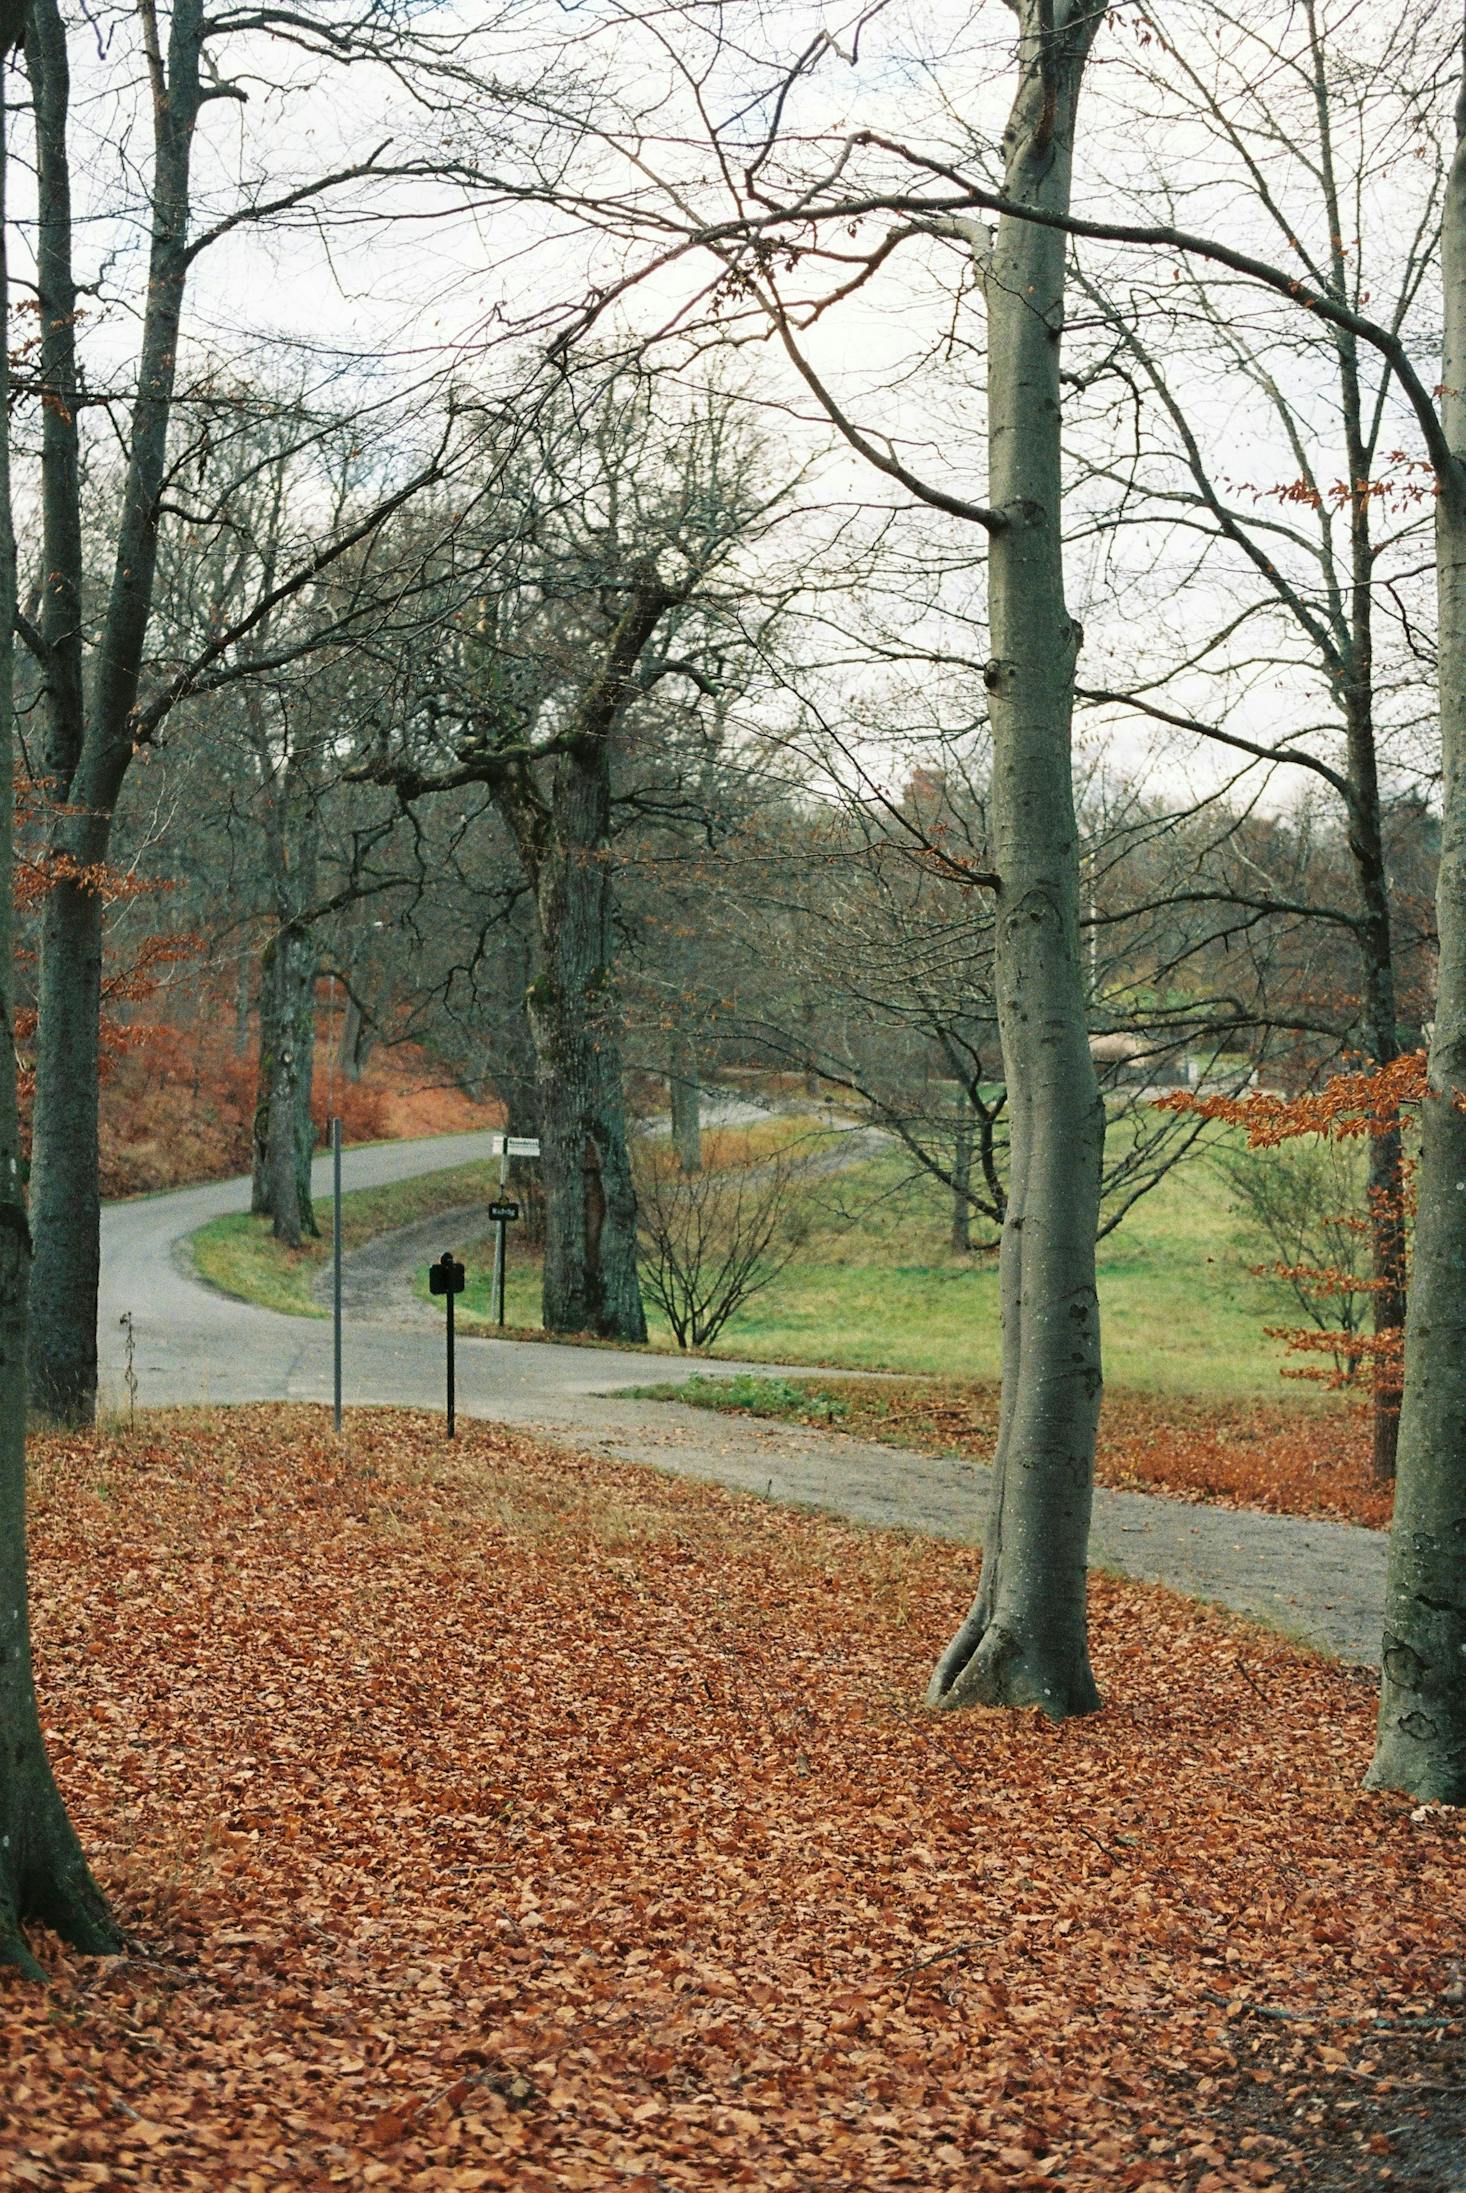 A winding path in a park, with orange leaves on the ground